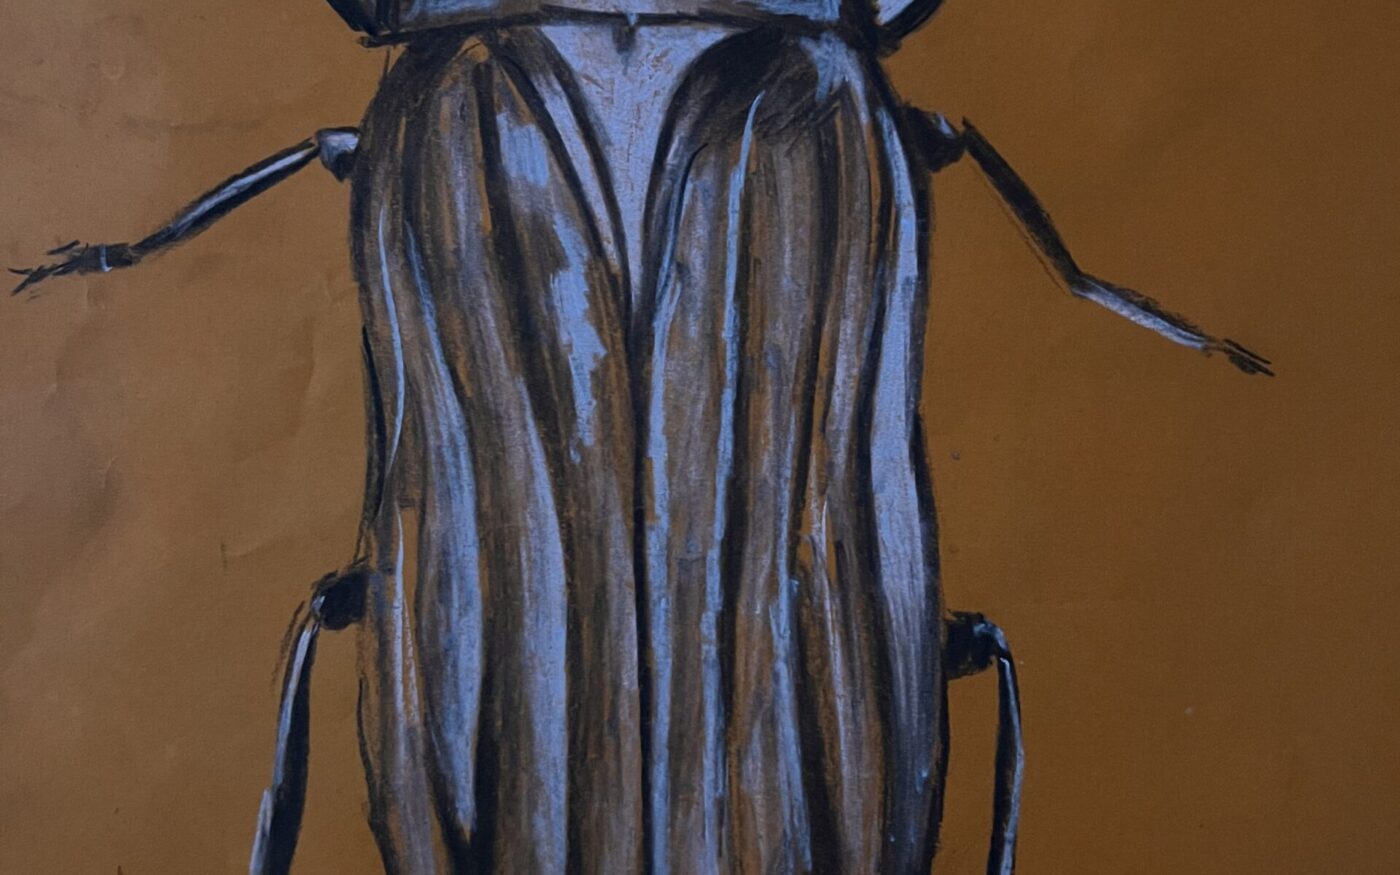 On the Move by Siyona Bhandari, Highly Commended in age 13-18 category, Insect Week 2022 art competition.